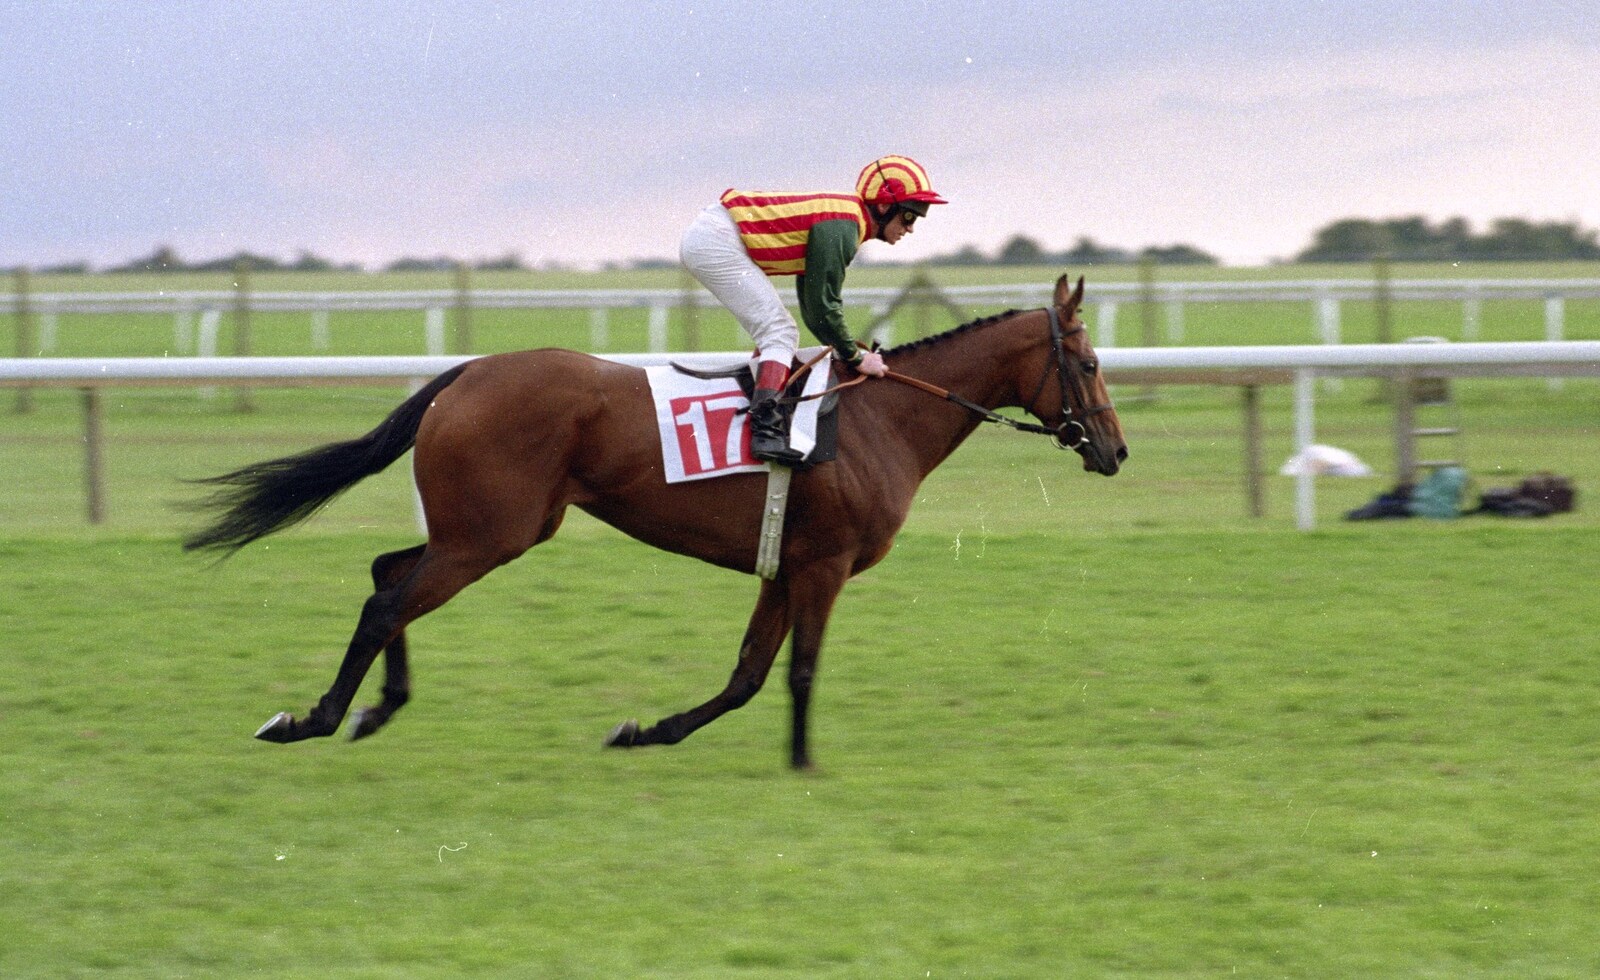 A tripey jockey on horse 17 from 3G Lab Goes to the Races, Newmarket, Suffolk - 15th July 2001